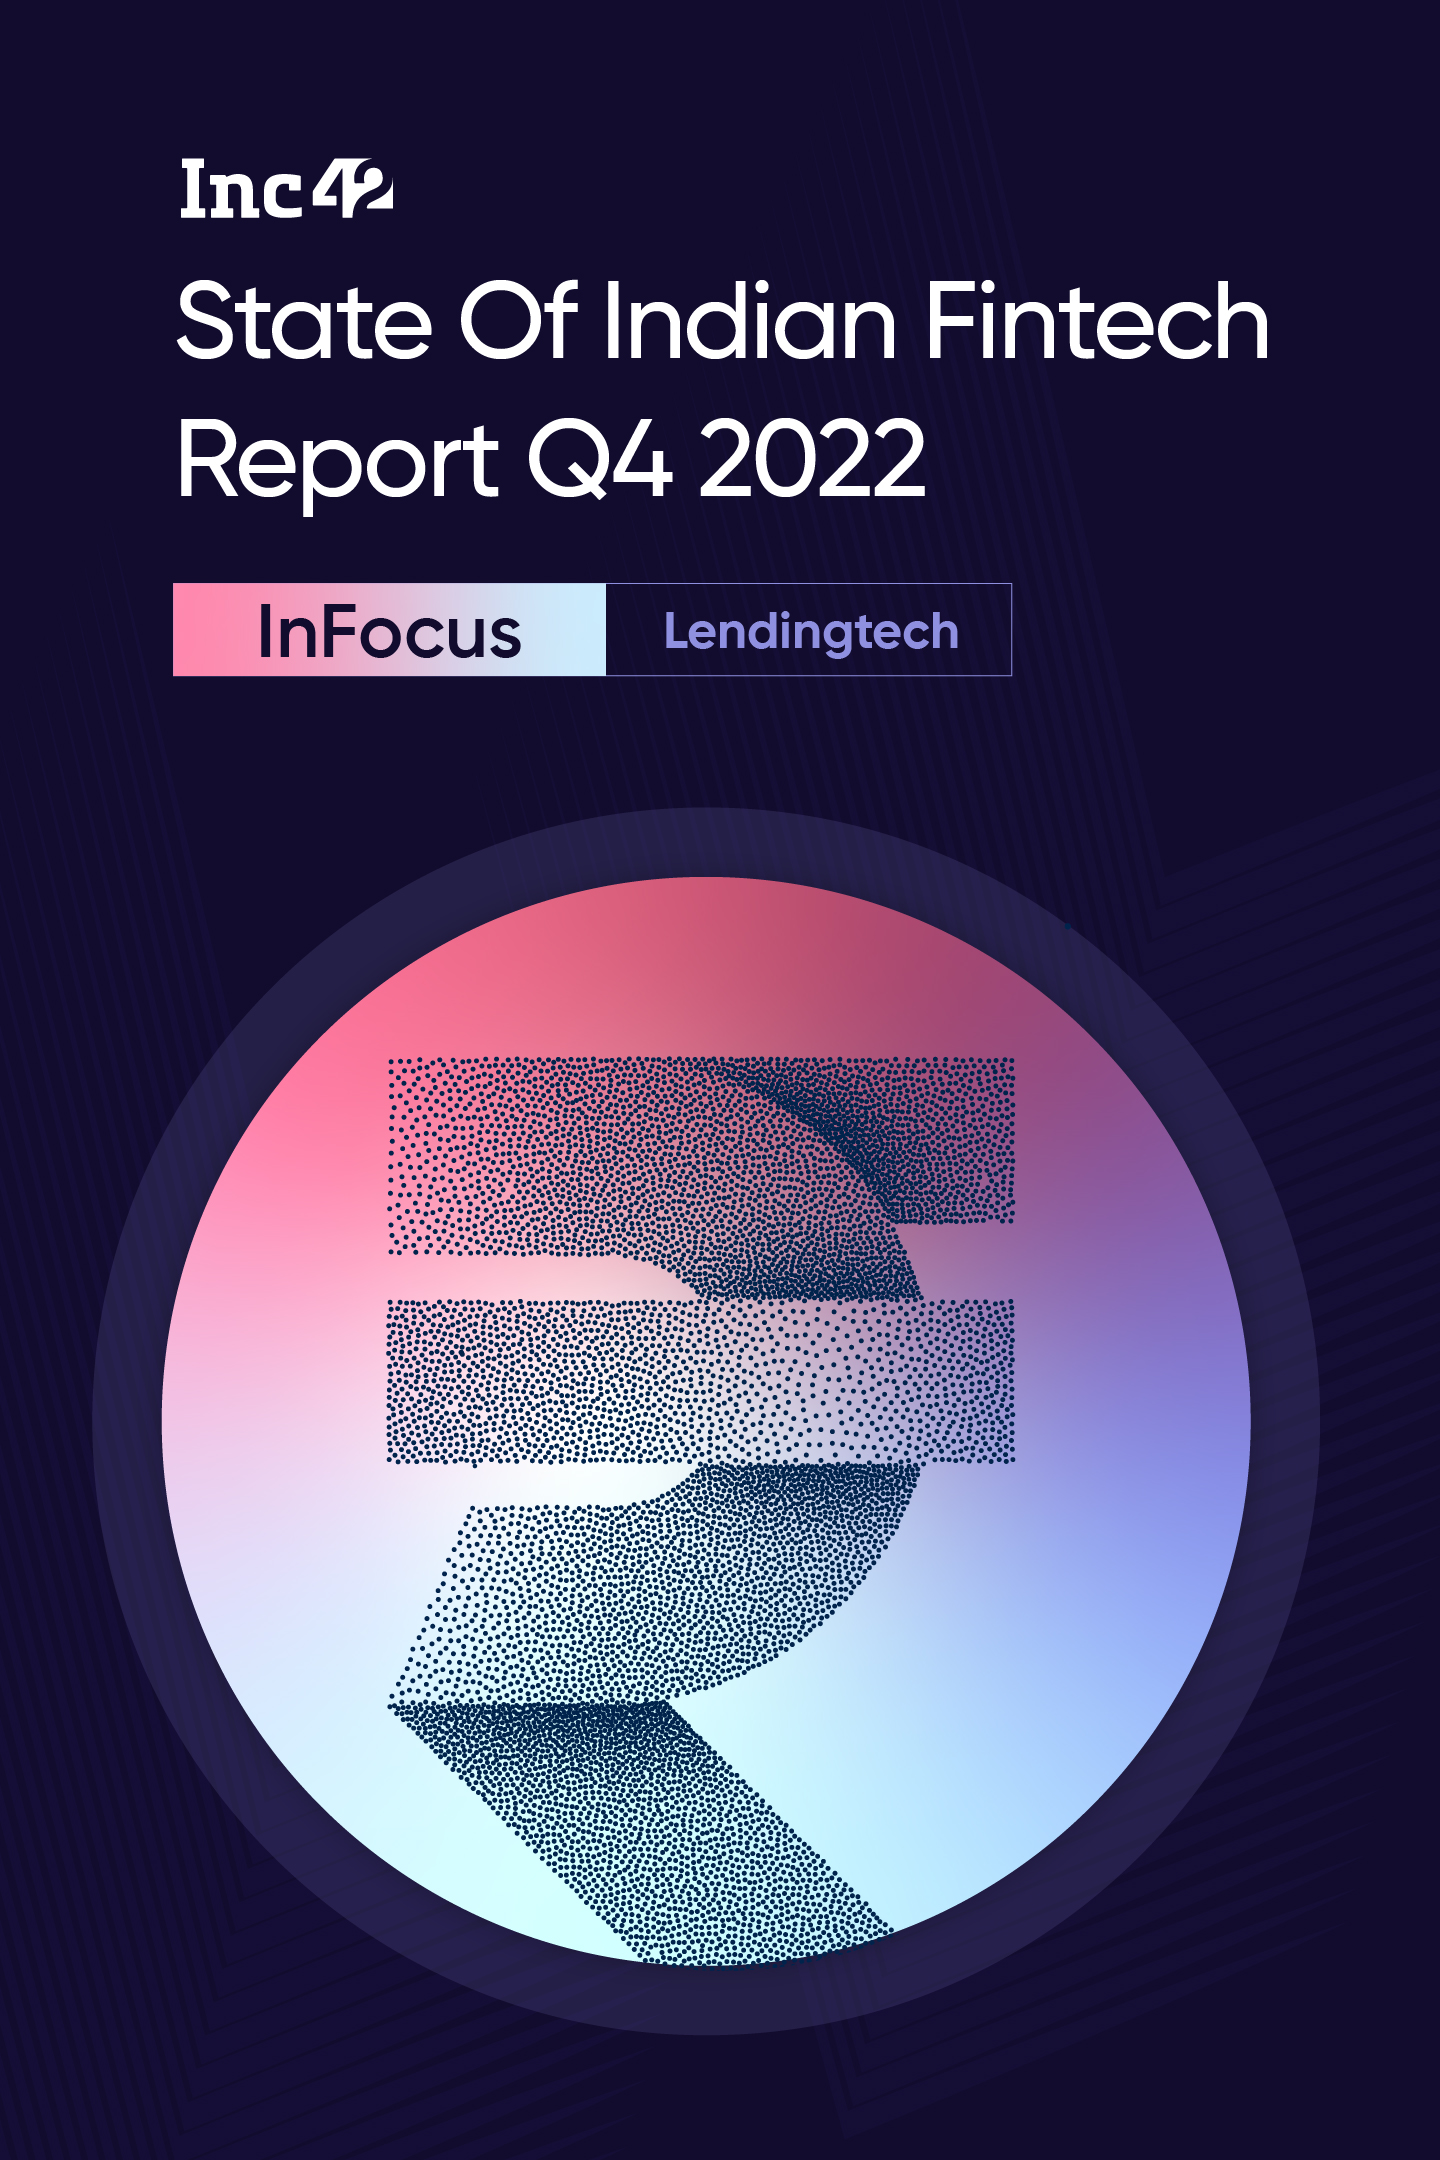 State Of Indian Fintech Report, Q4 2022